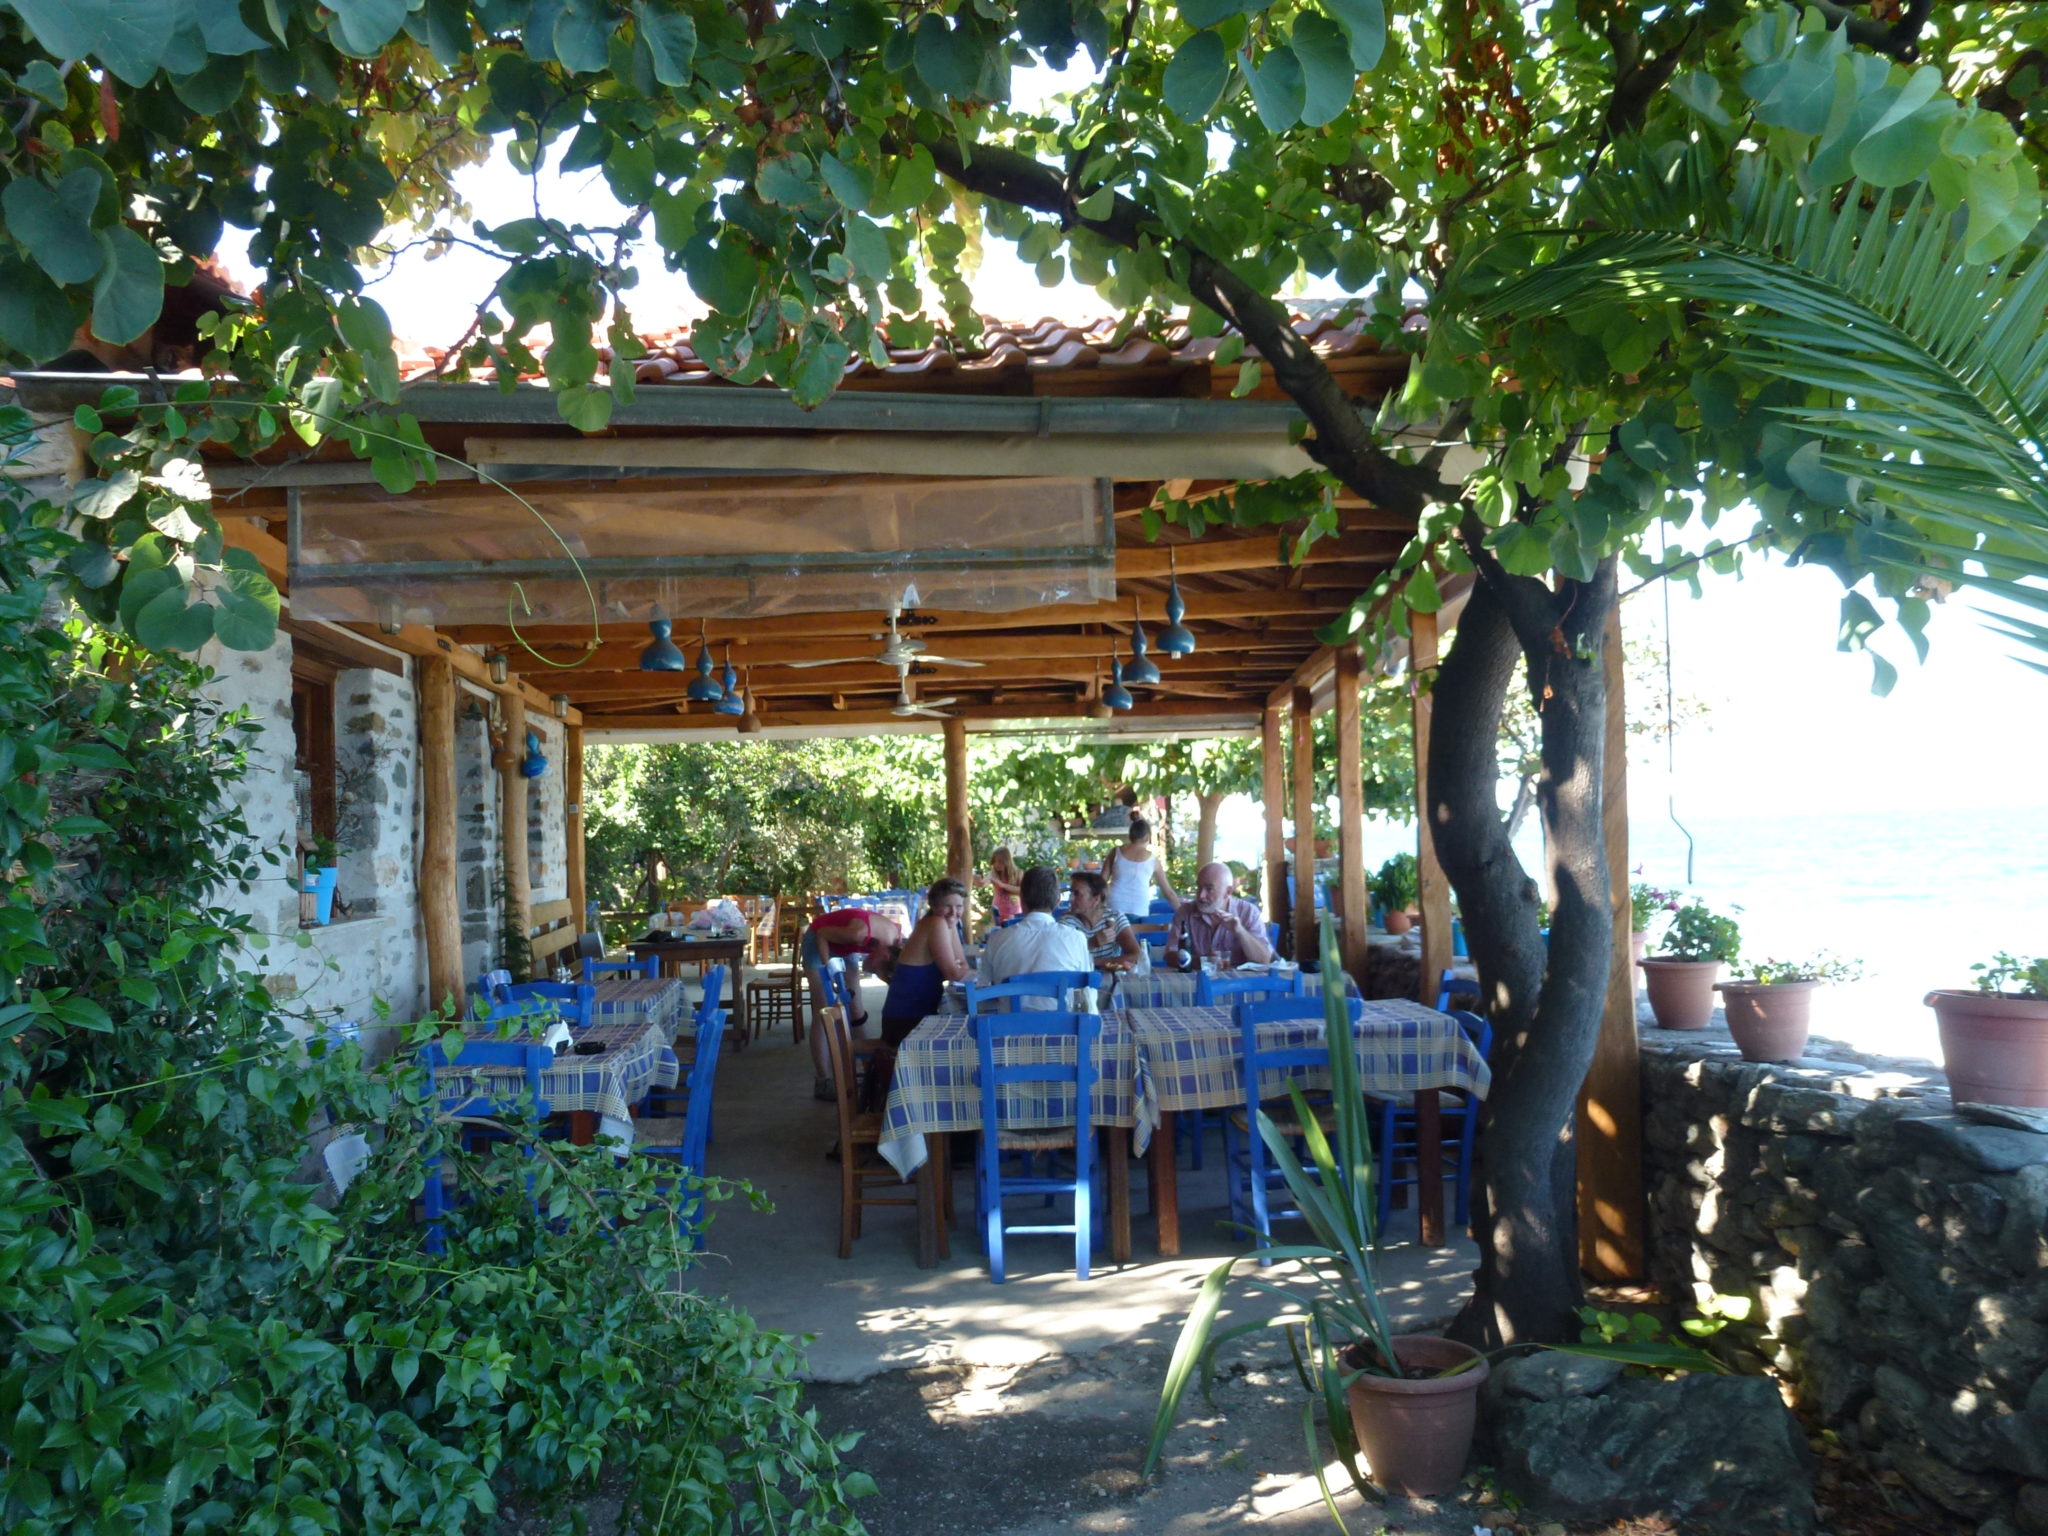 It would be rude not to stop for a cooling drink at the beautiful taverna by the sea